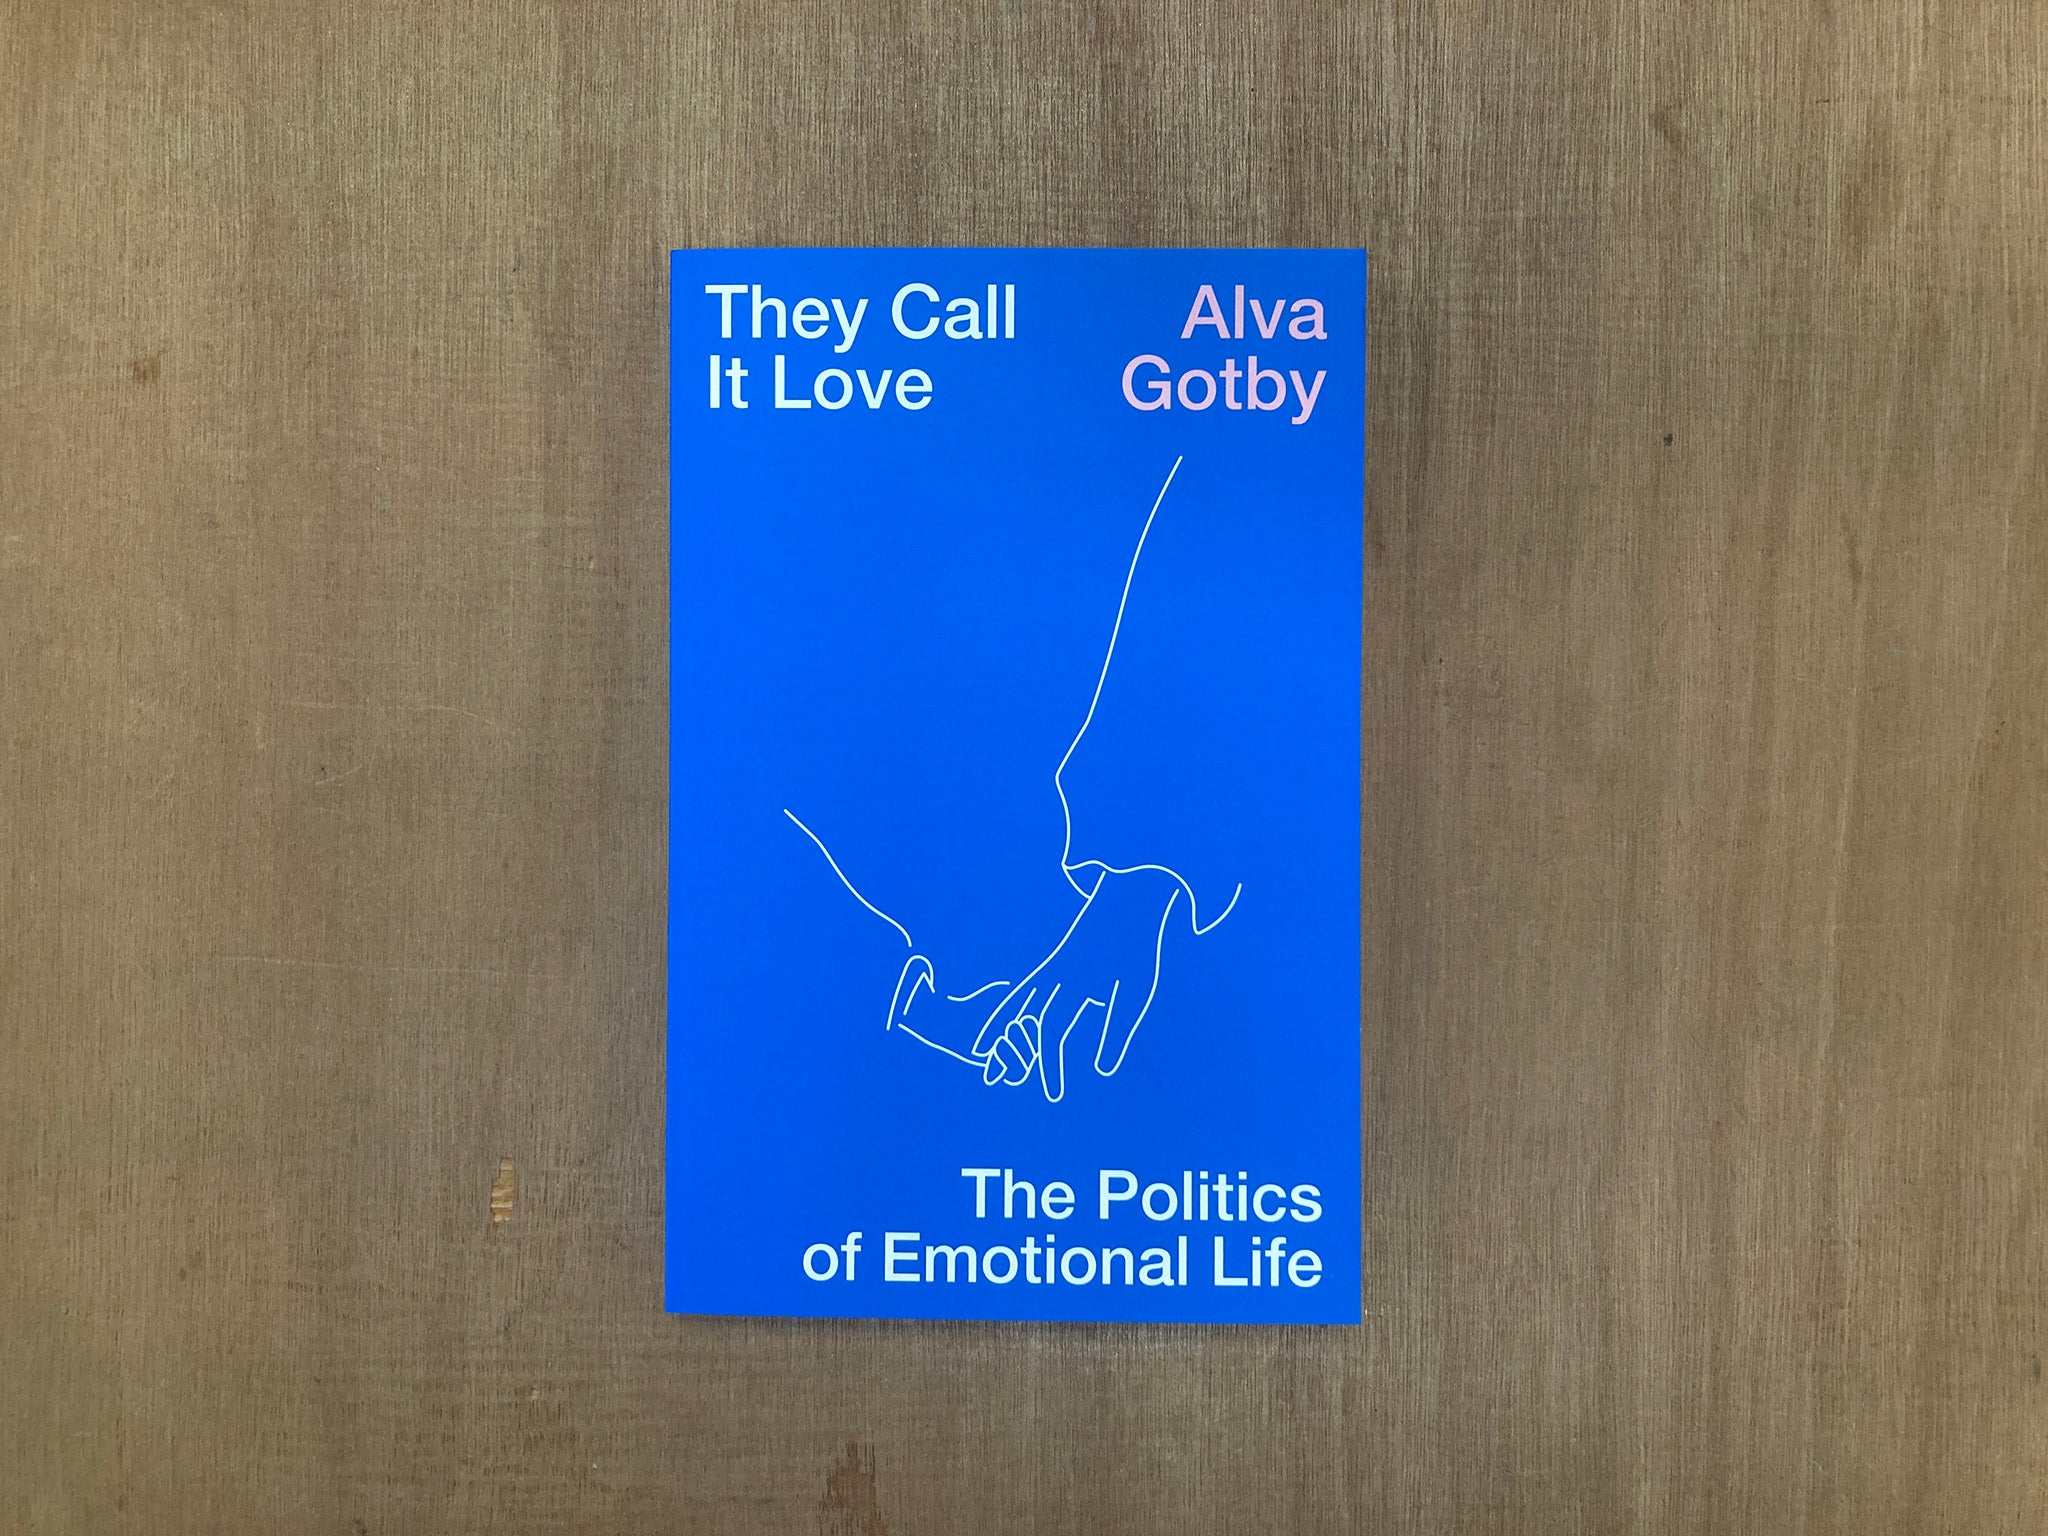 THEY CALL IT LOVE: THE POLITICS OF EMOTIONAL LIFE by Alva Gotby